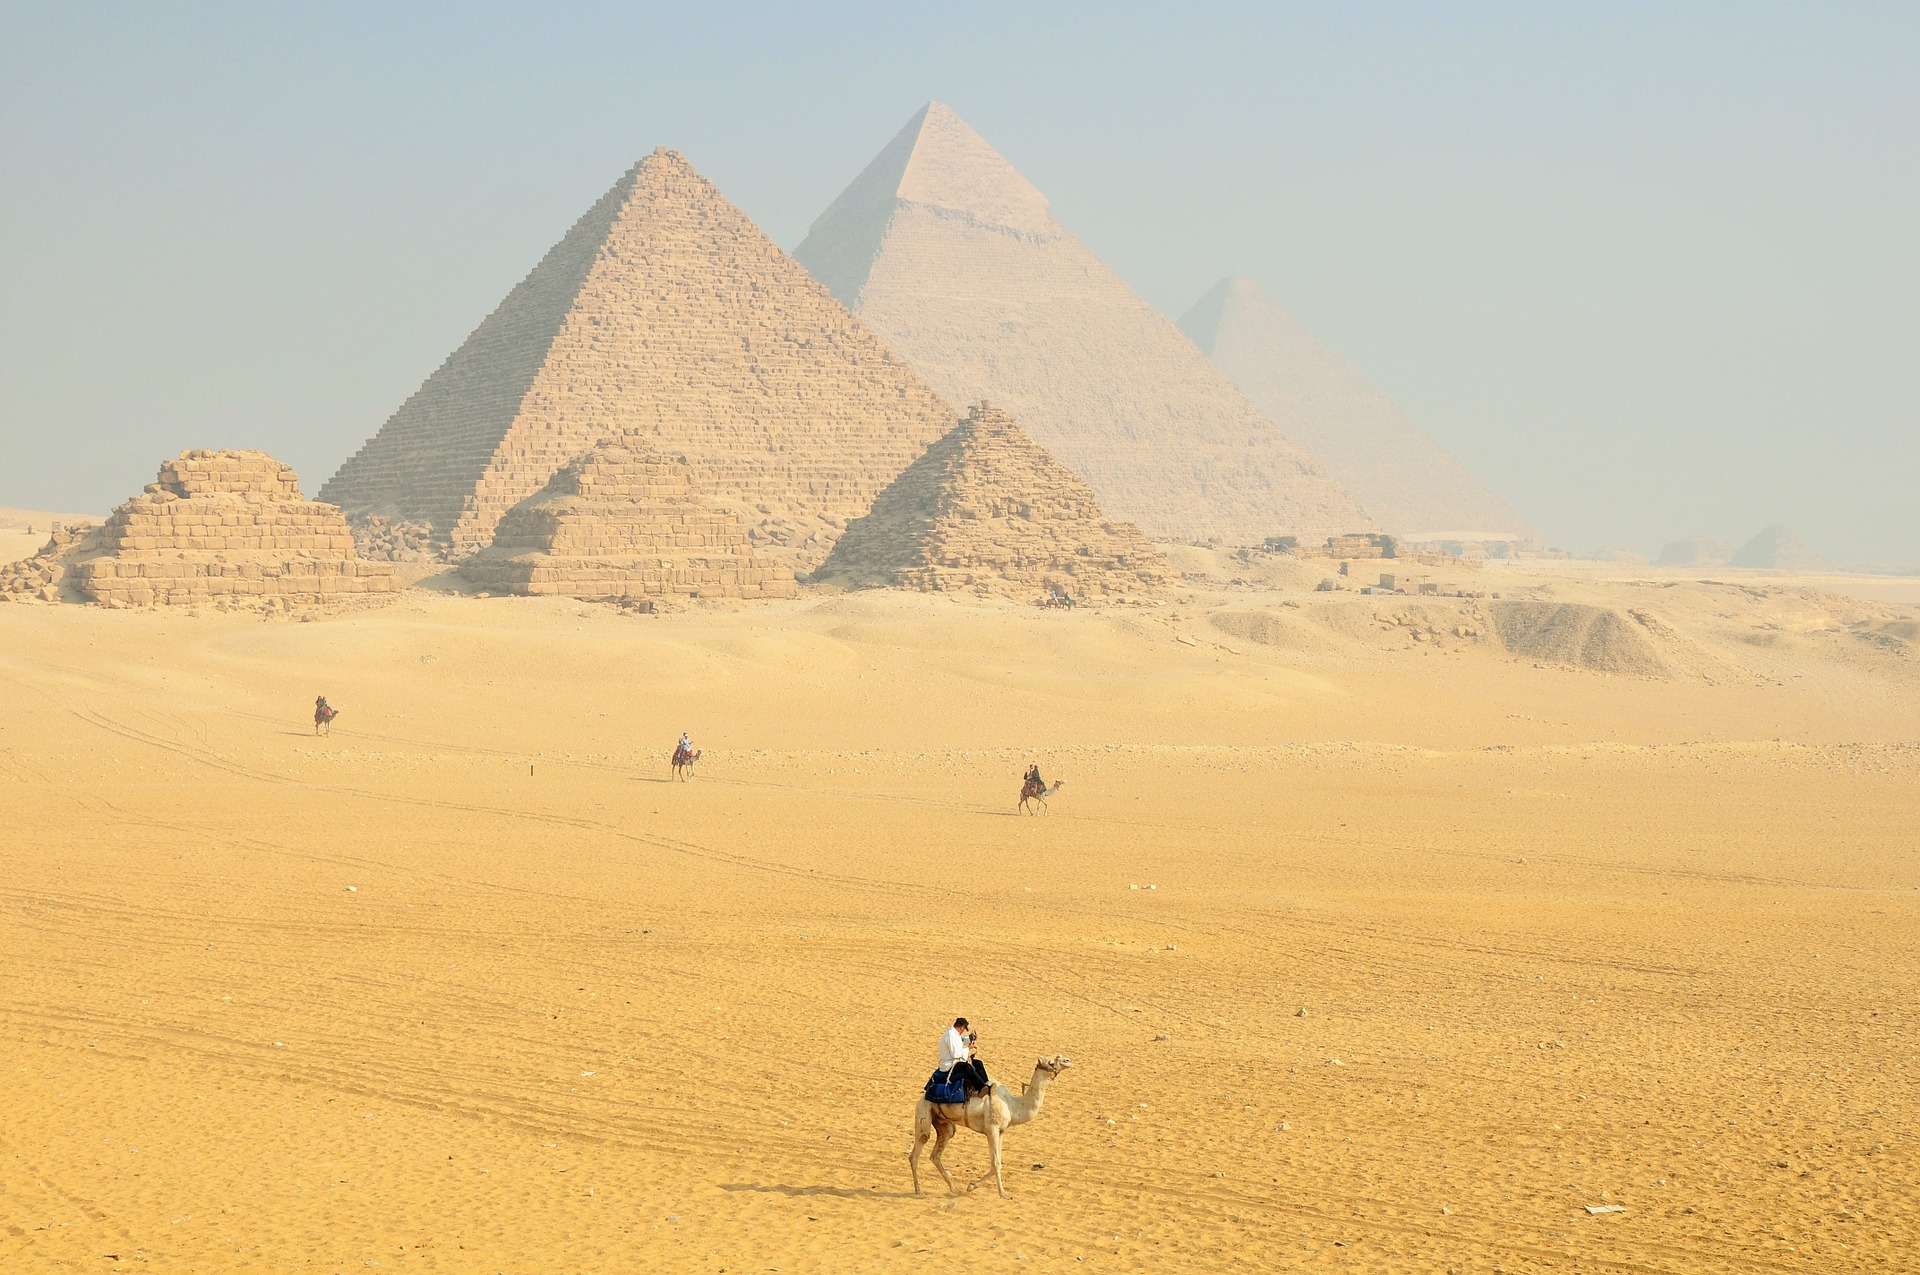 Camel riders in front of the pyramids in Egypt